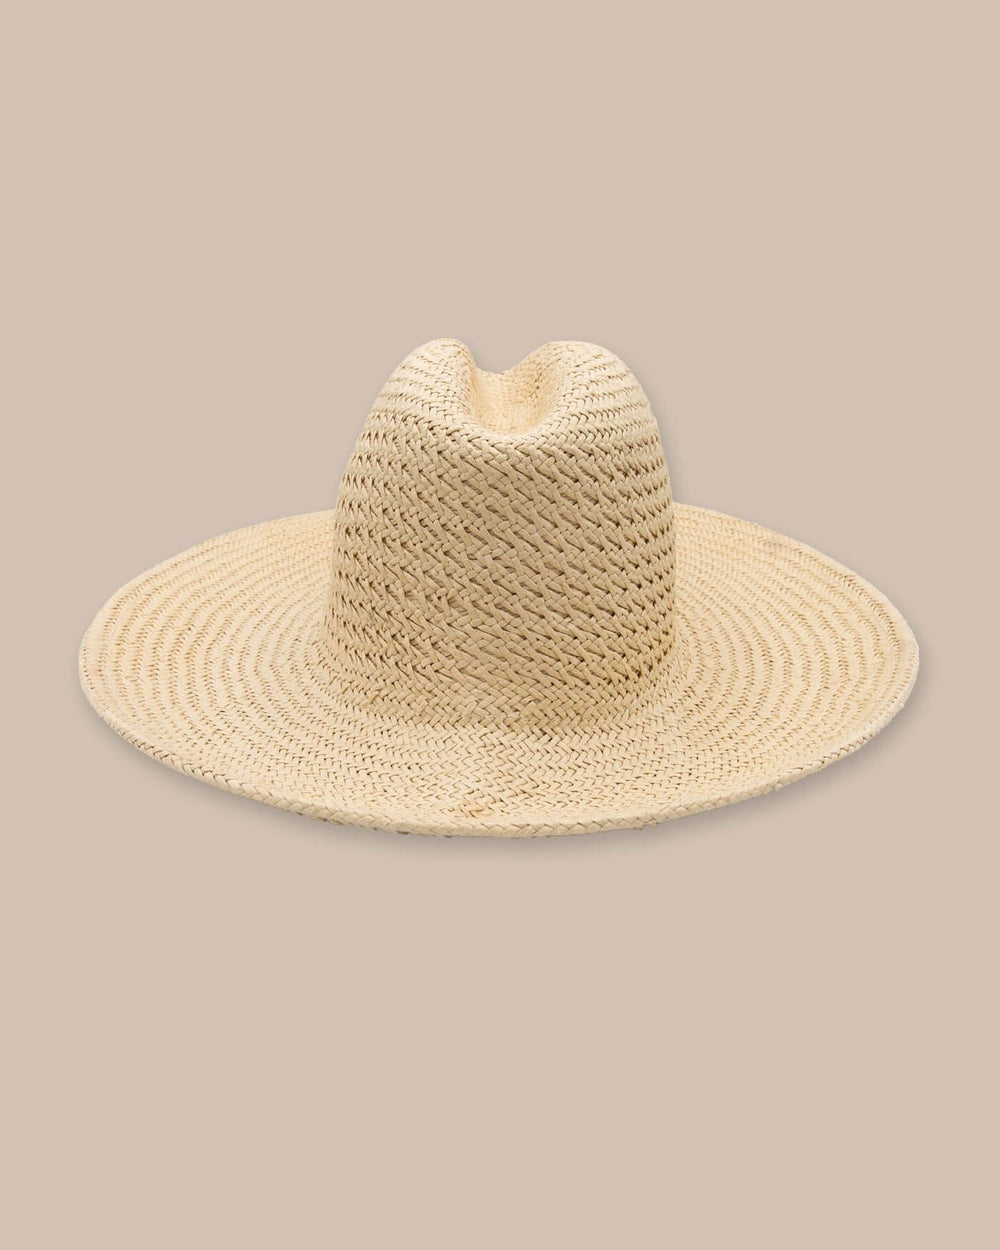 The back view of the Southern Tide Packable Straw Beach Hat by Southern Tide - Natural